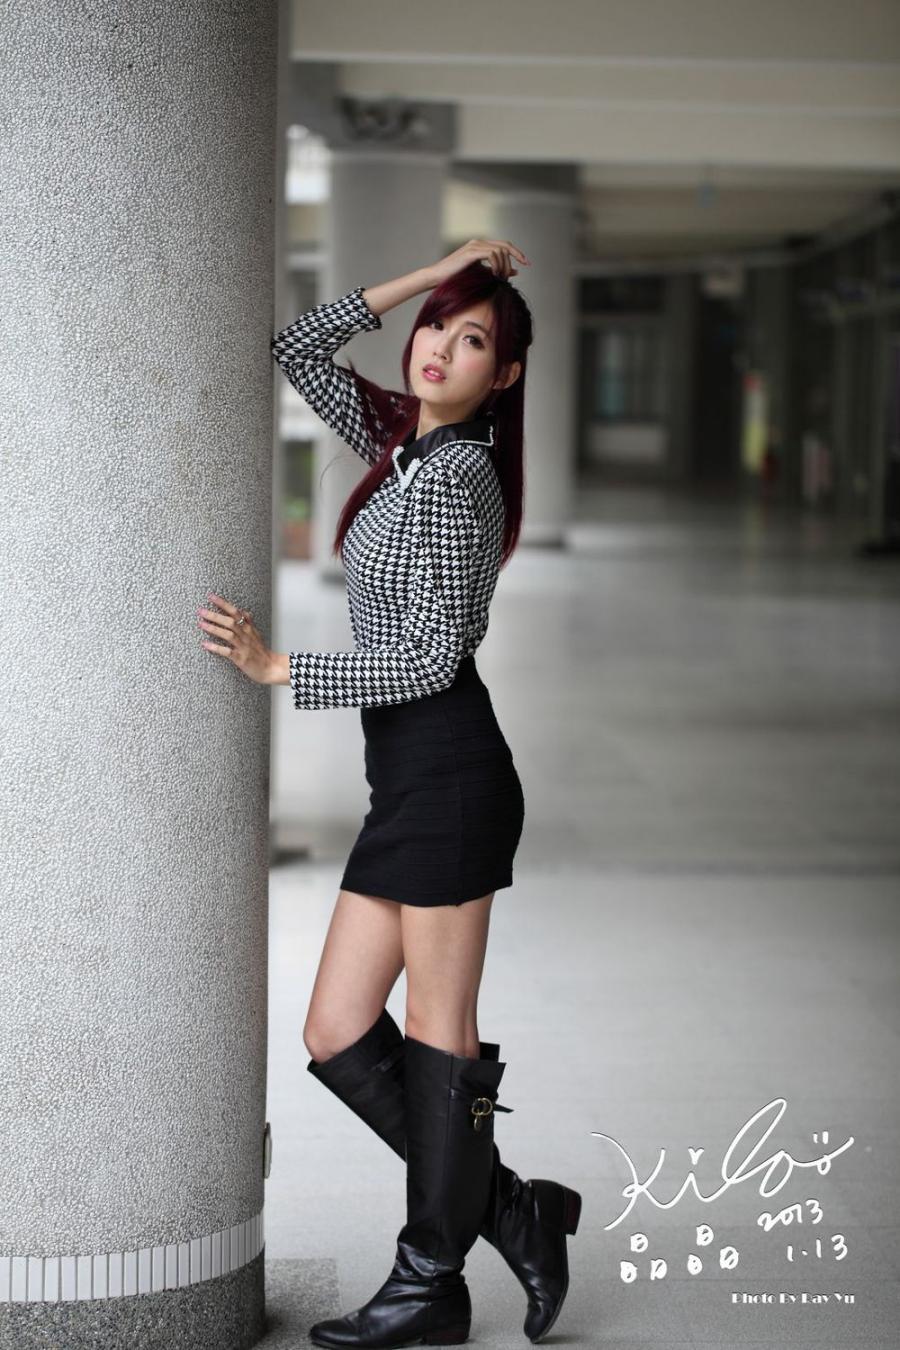 Liao Ting Lian Short Dress and Boot Pictures